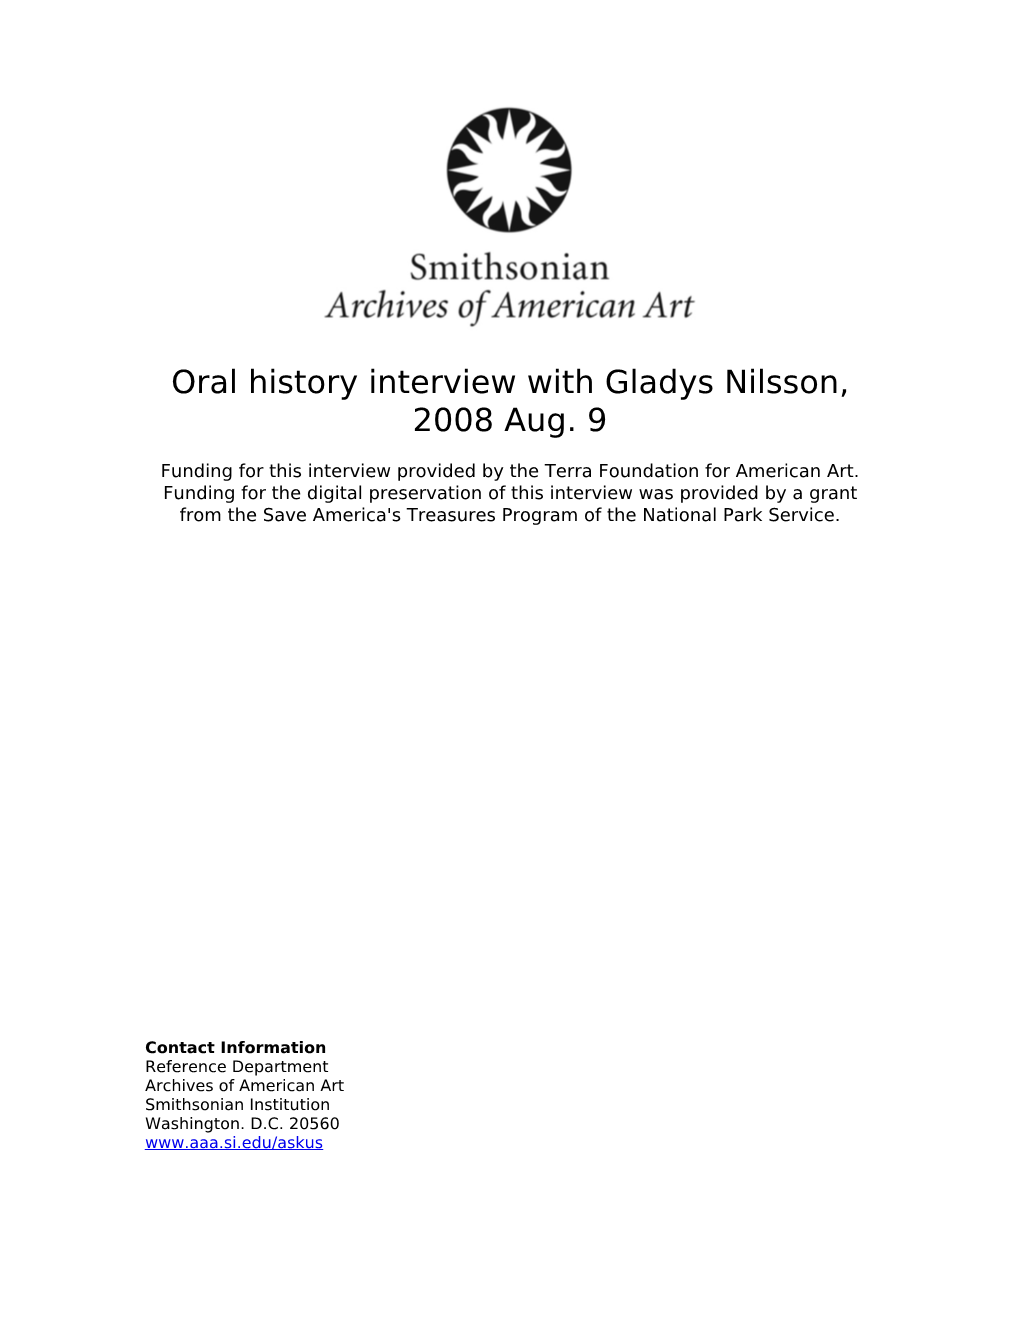 Oral History Interview with Gladys Nilsson, 2008 Aug. 9